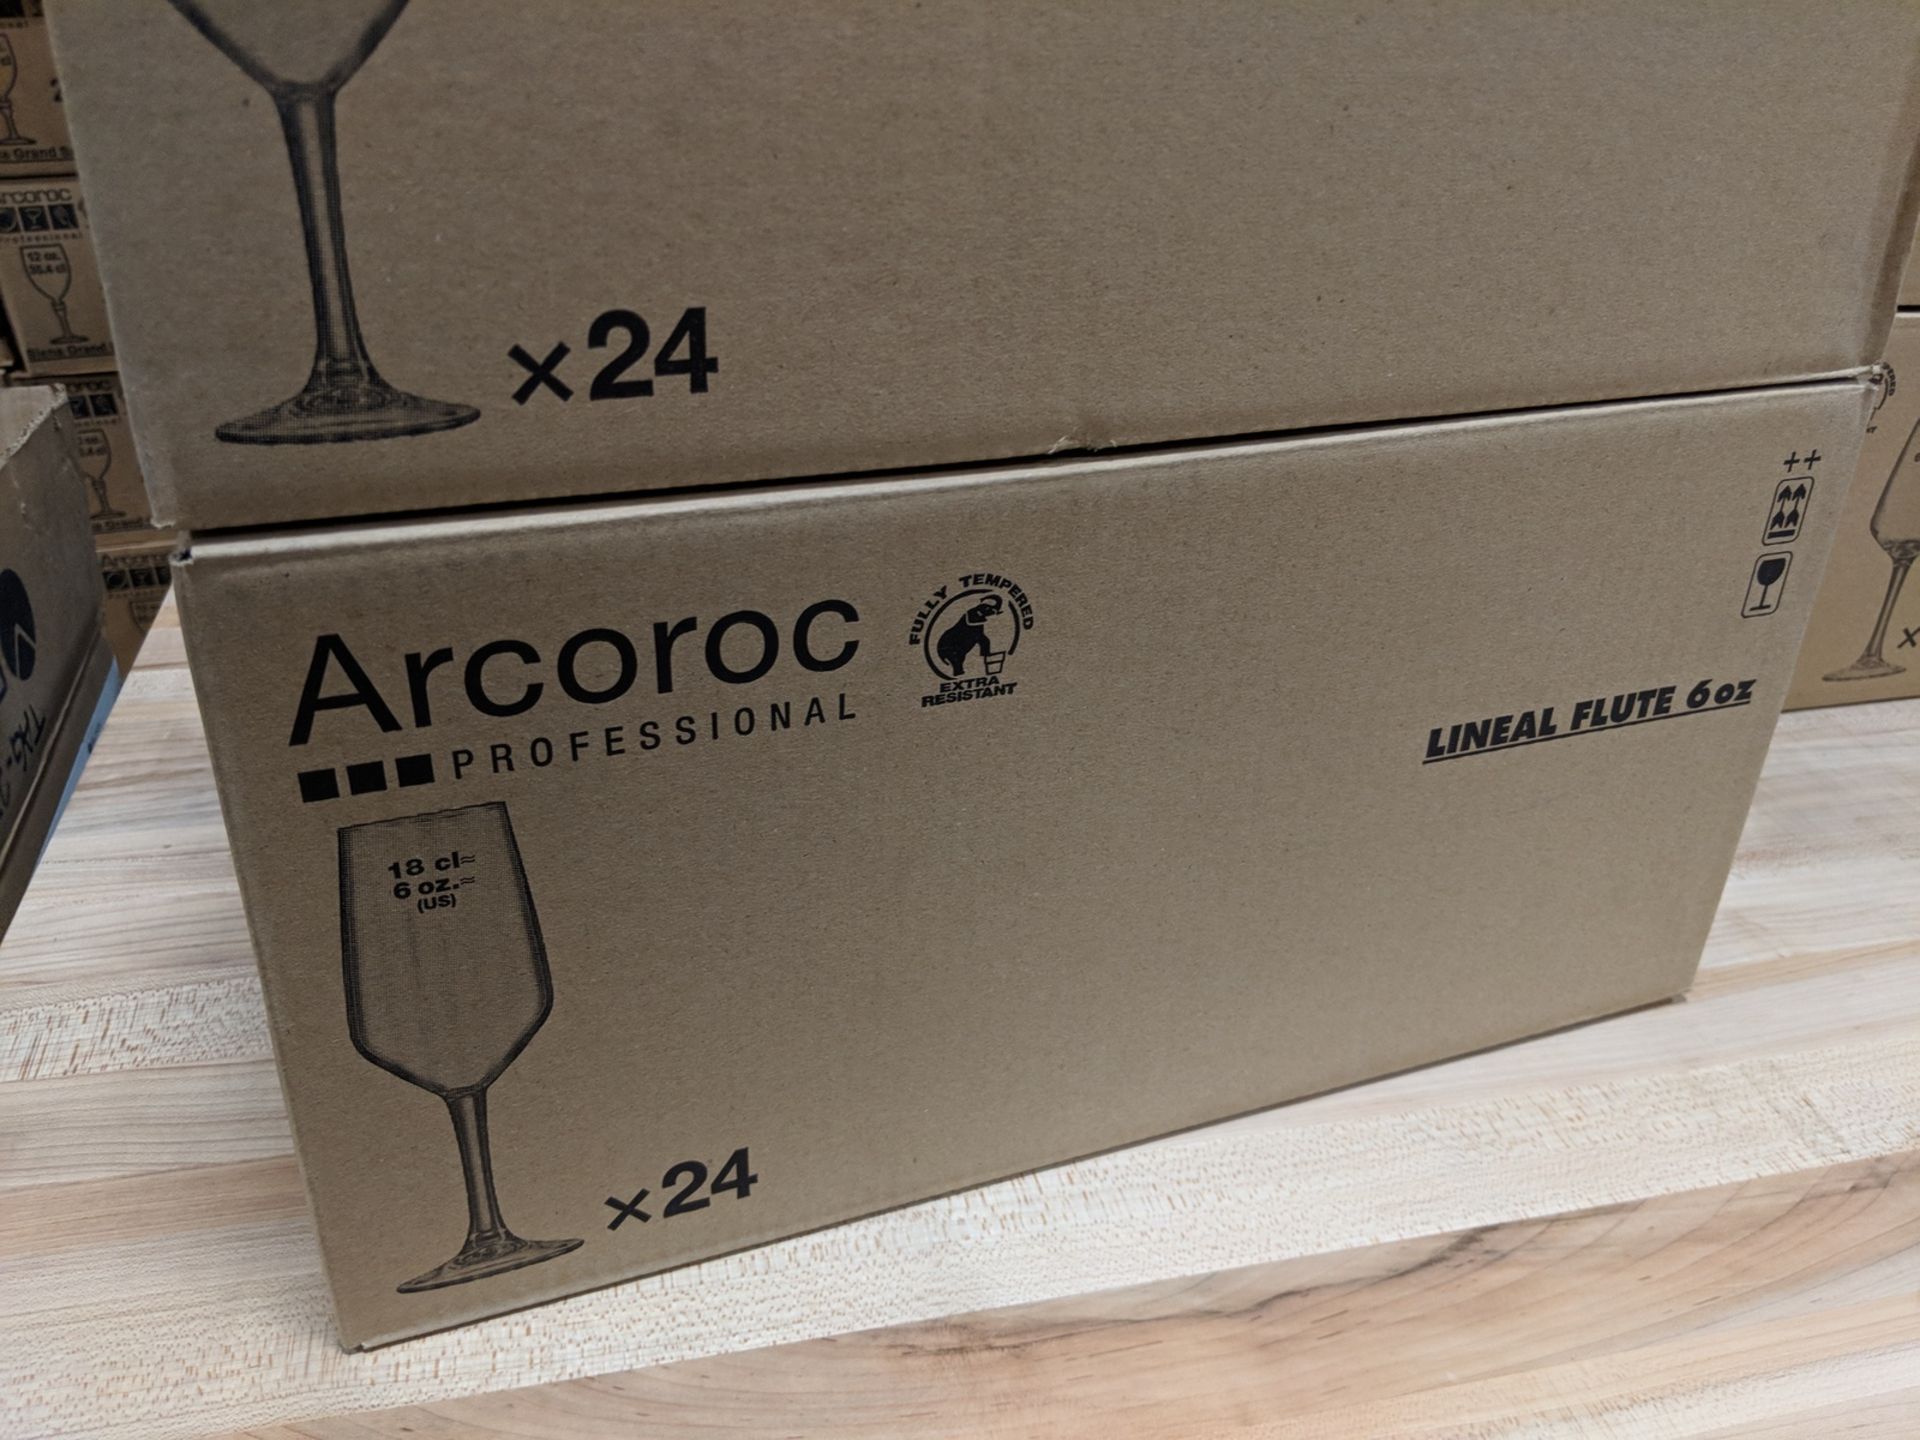 6oz/180ml Flute Glasses, Arcoroc Lineal C3569 - Lot of 24 - Image 2 of 4